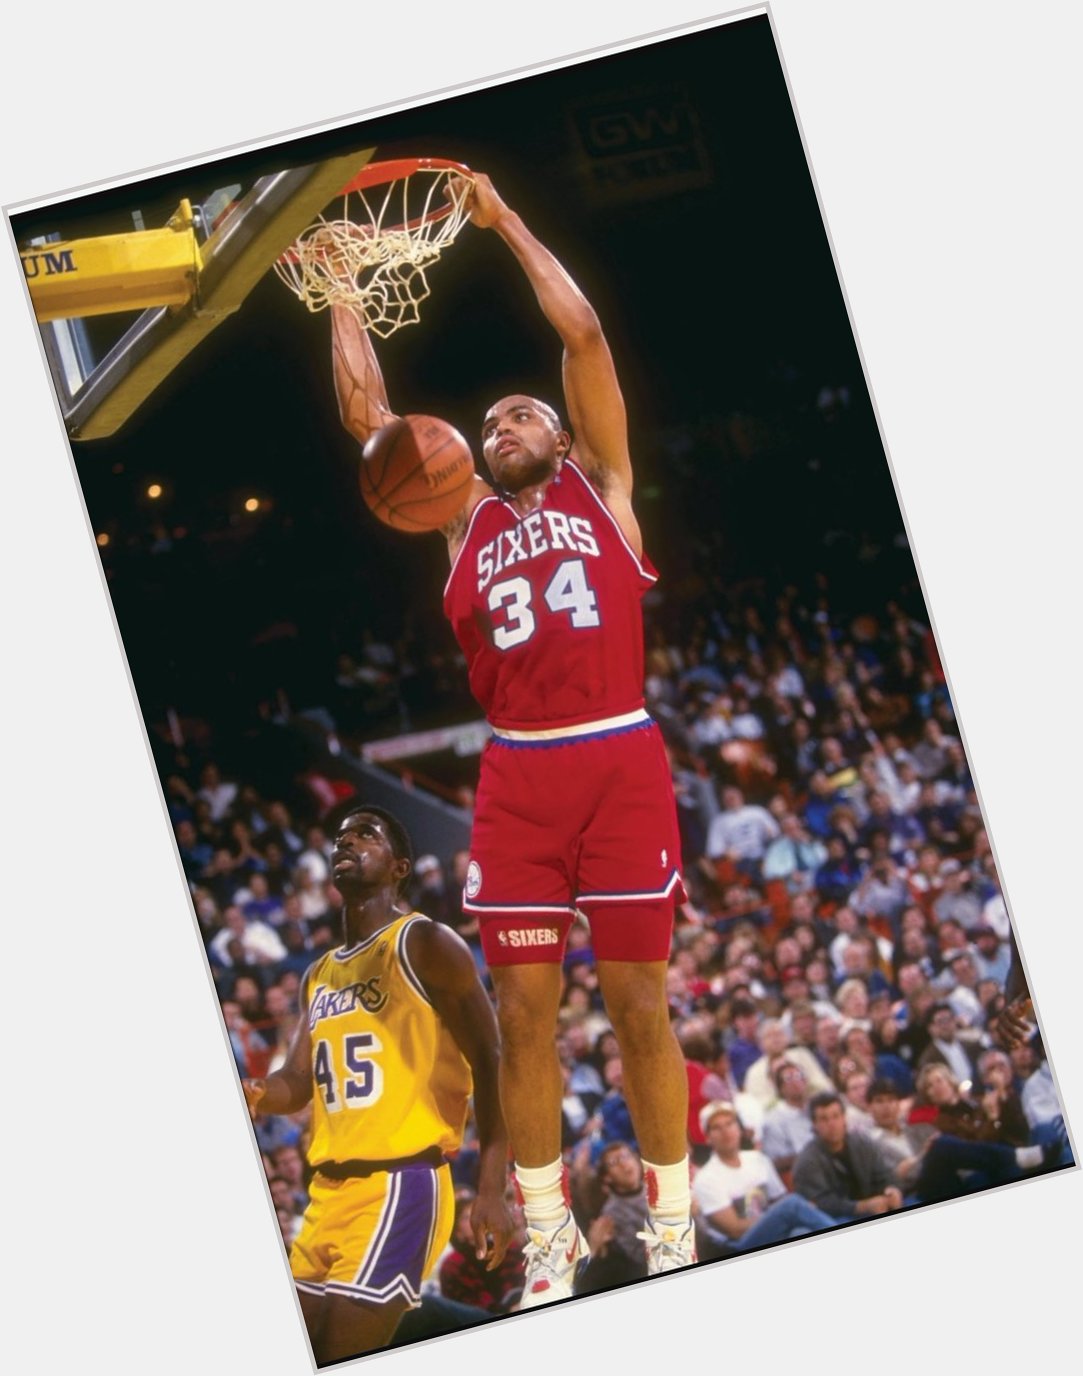 Happy birthday to the Round Mound of Rebound Charles Barkley! Have a great day Chuck! 